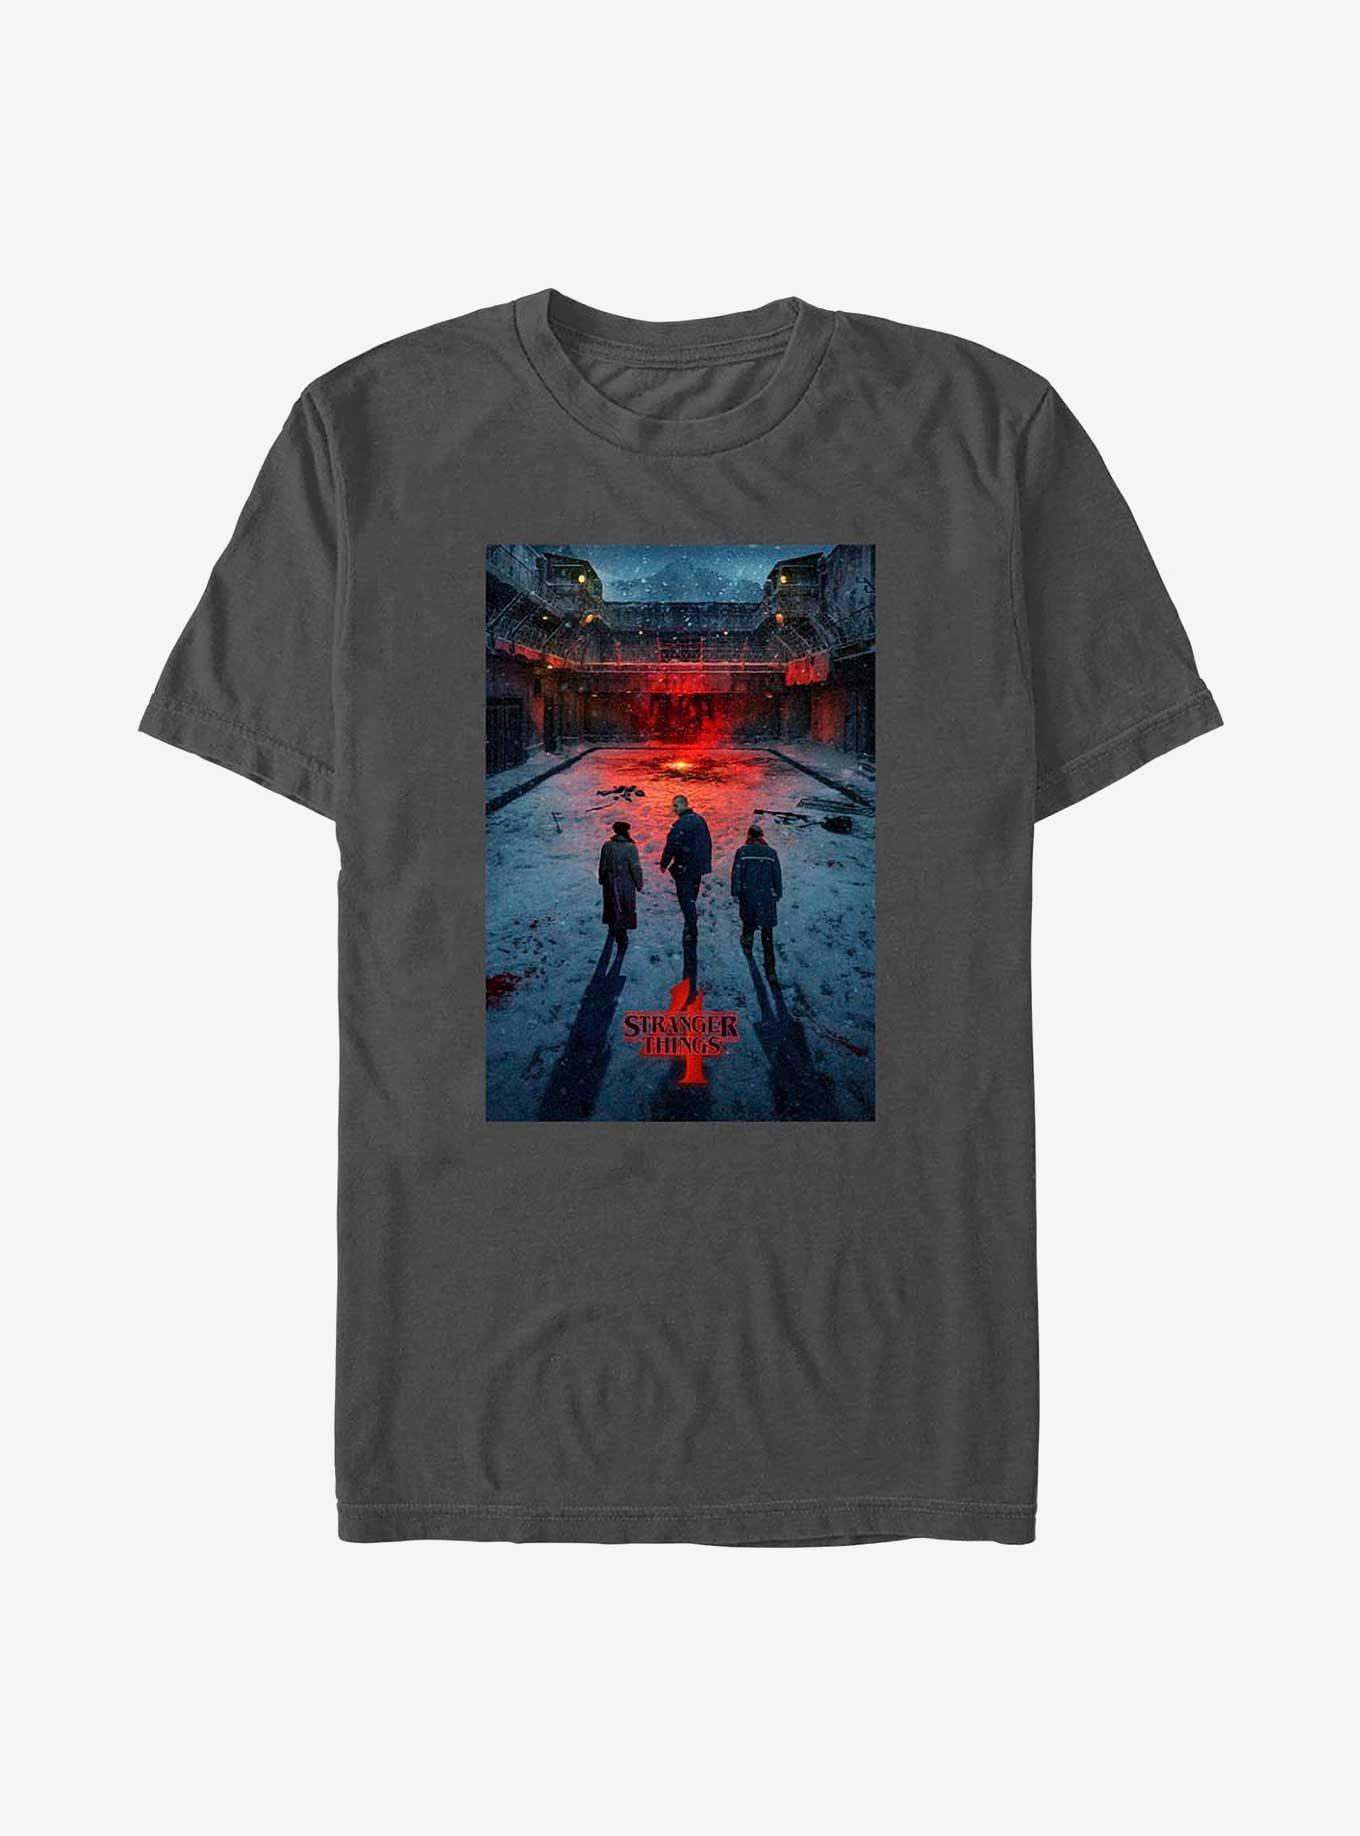 Stranger Things Russia Poster T-Shirt, CHARCOAL, hi-res